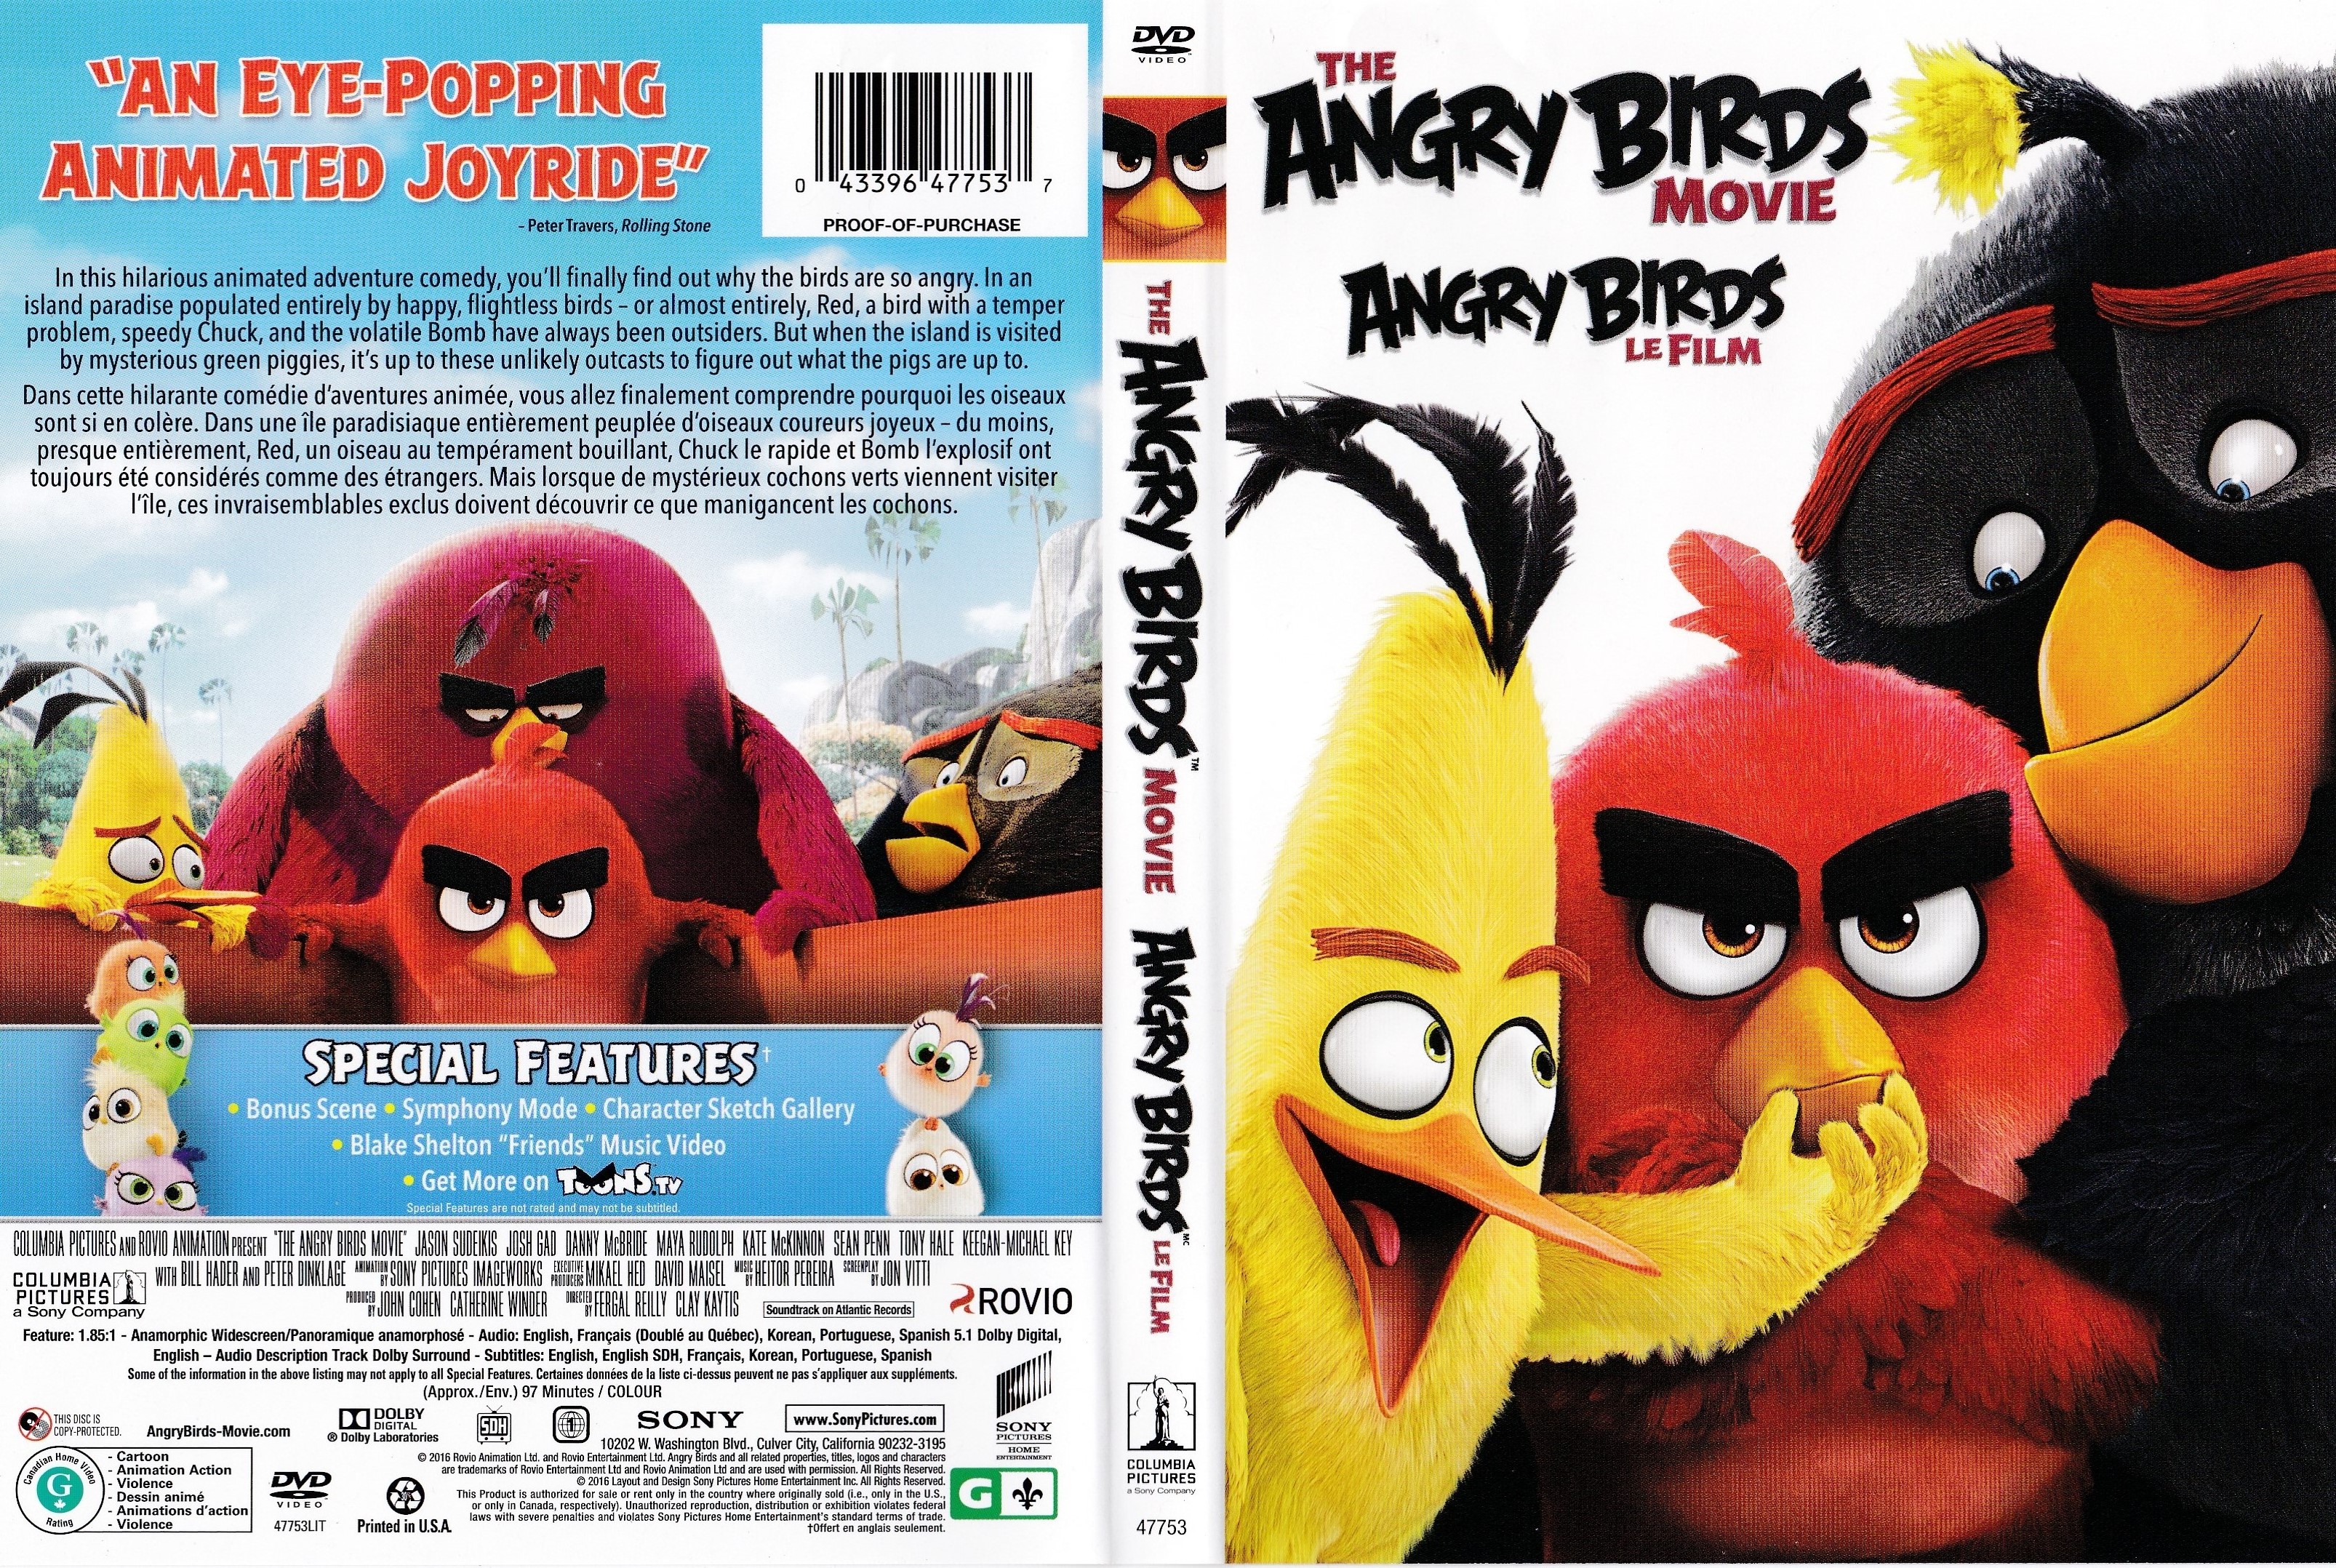 Jaquette DVD Angry birds le film (Canadienne)